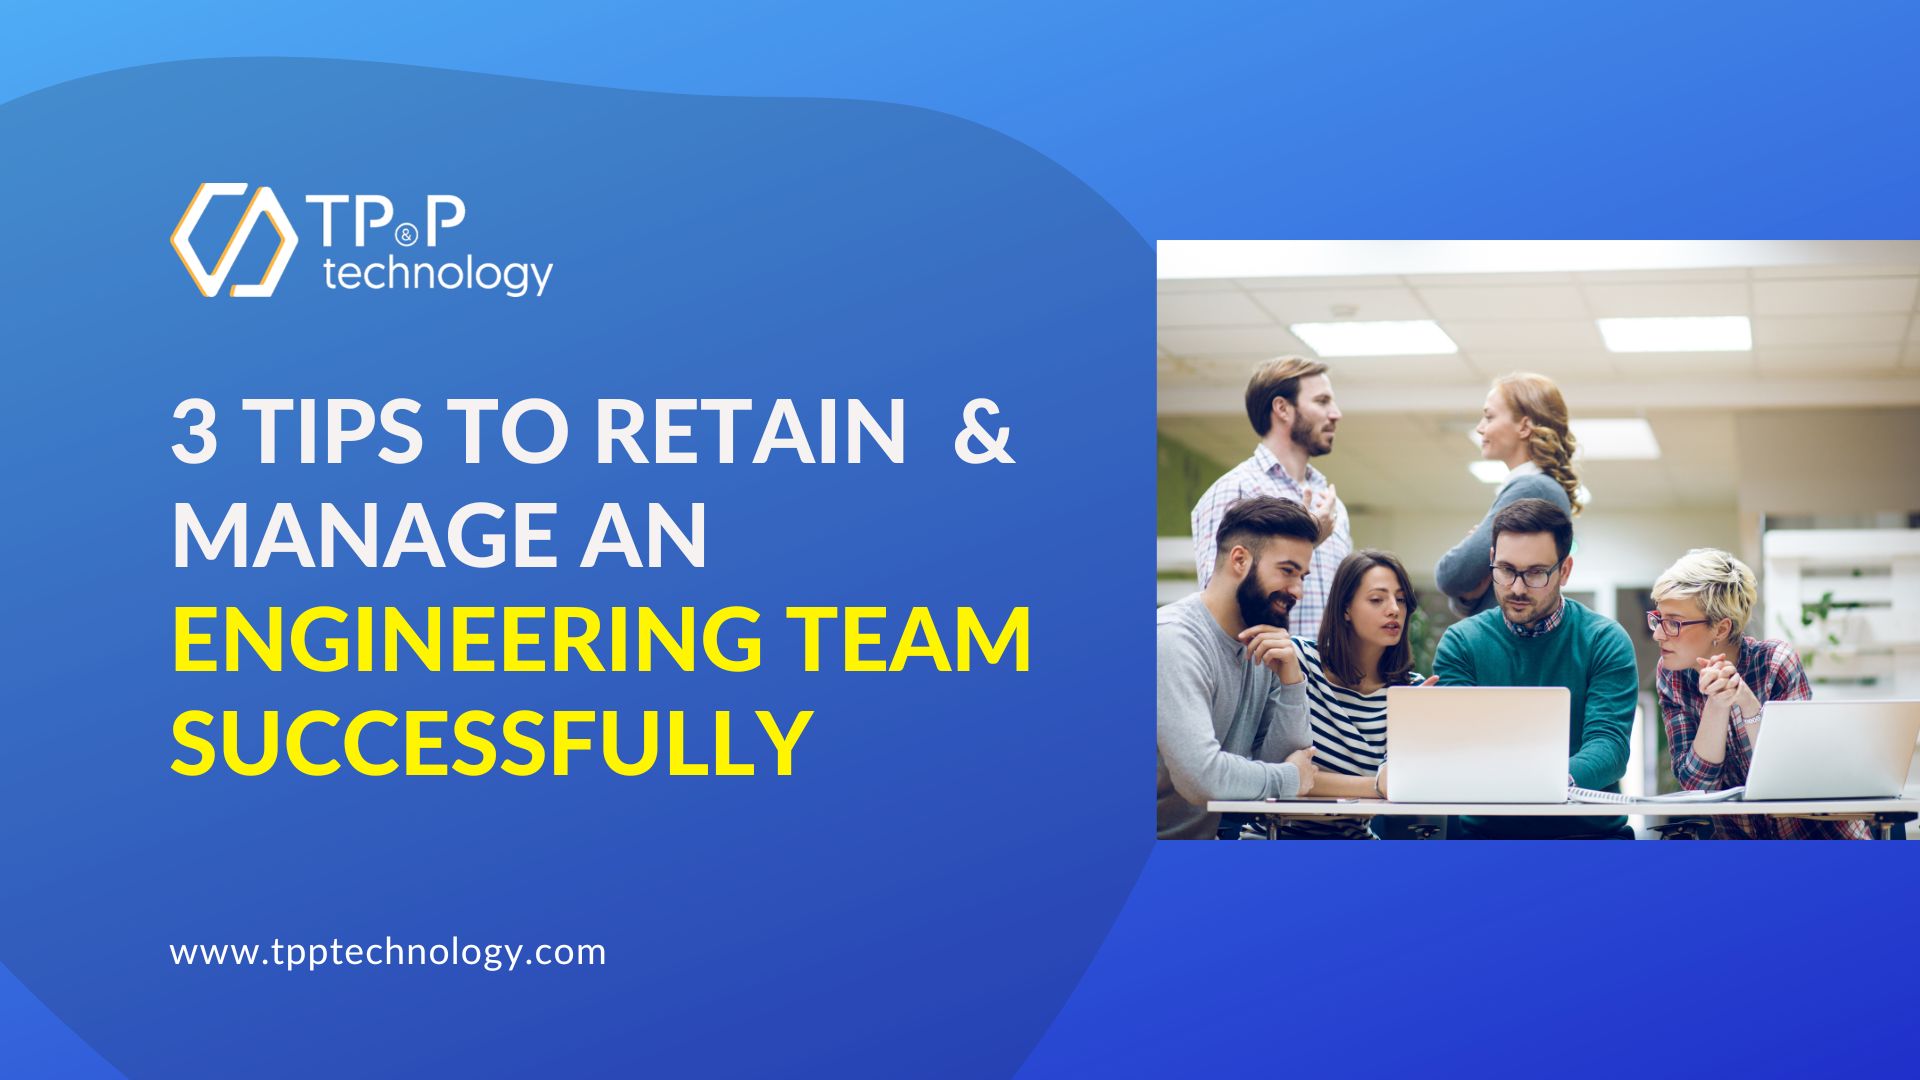 3 Tips To Retain & Manage An Engineering Team Successfully